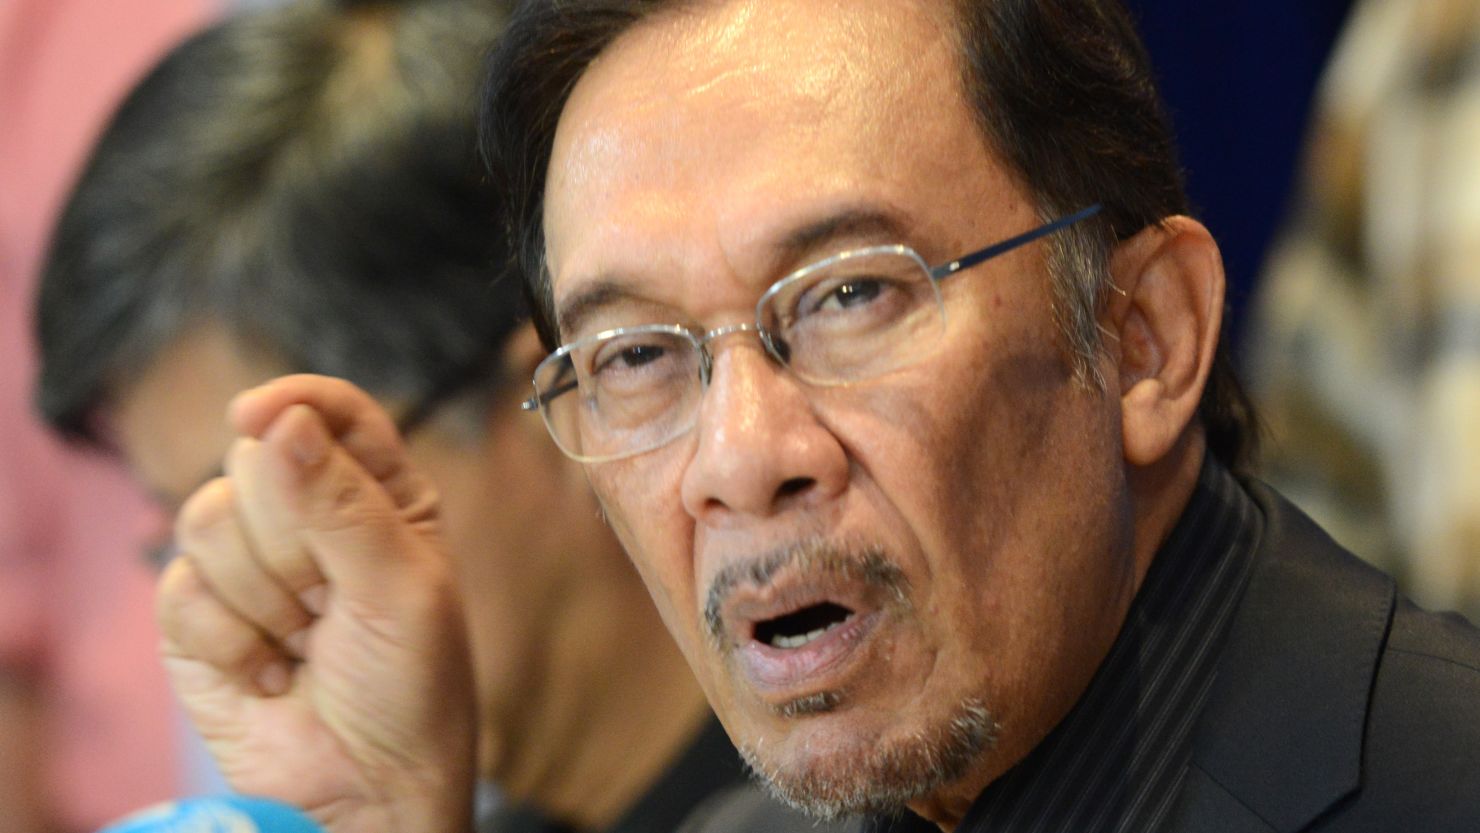 Anwar Ibrahim was acquitted of the sodomy charge in January 2012.